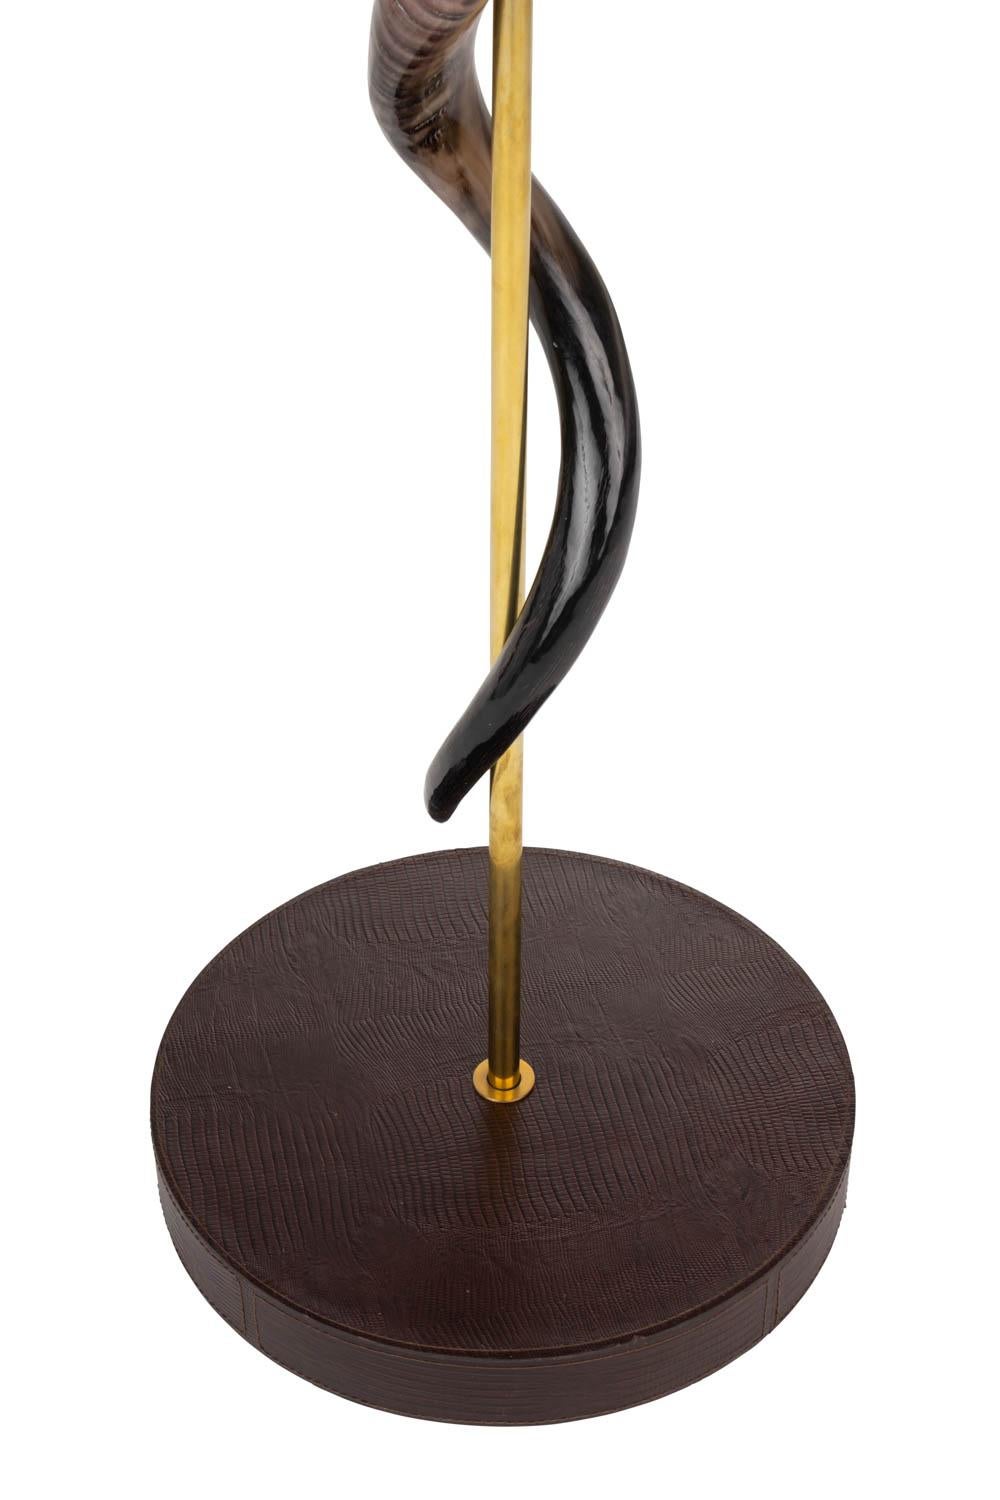 Handcrafted in South Africa, this naturally elegant floor lamp features two inverse African kudu horns encirling a brass rod above a round wooden base, which is wrapped in top-stitched embossed leather. All hide and horn has been sustainably sourced